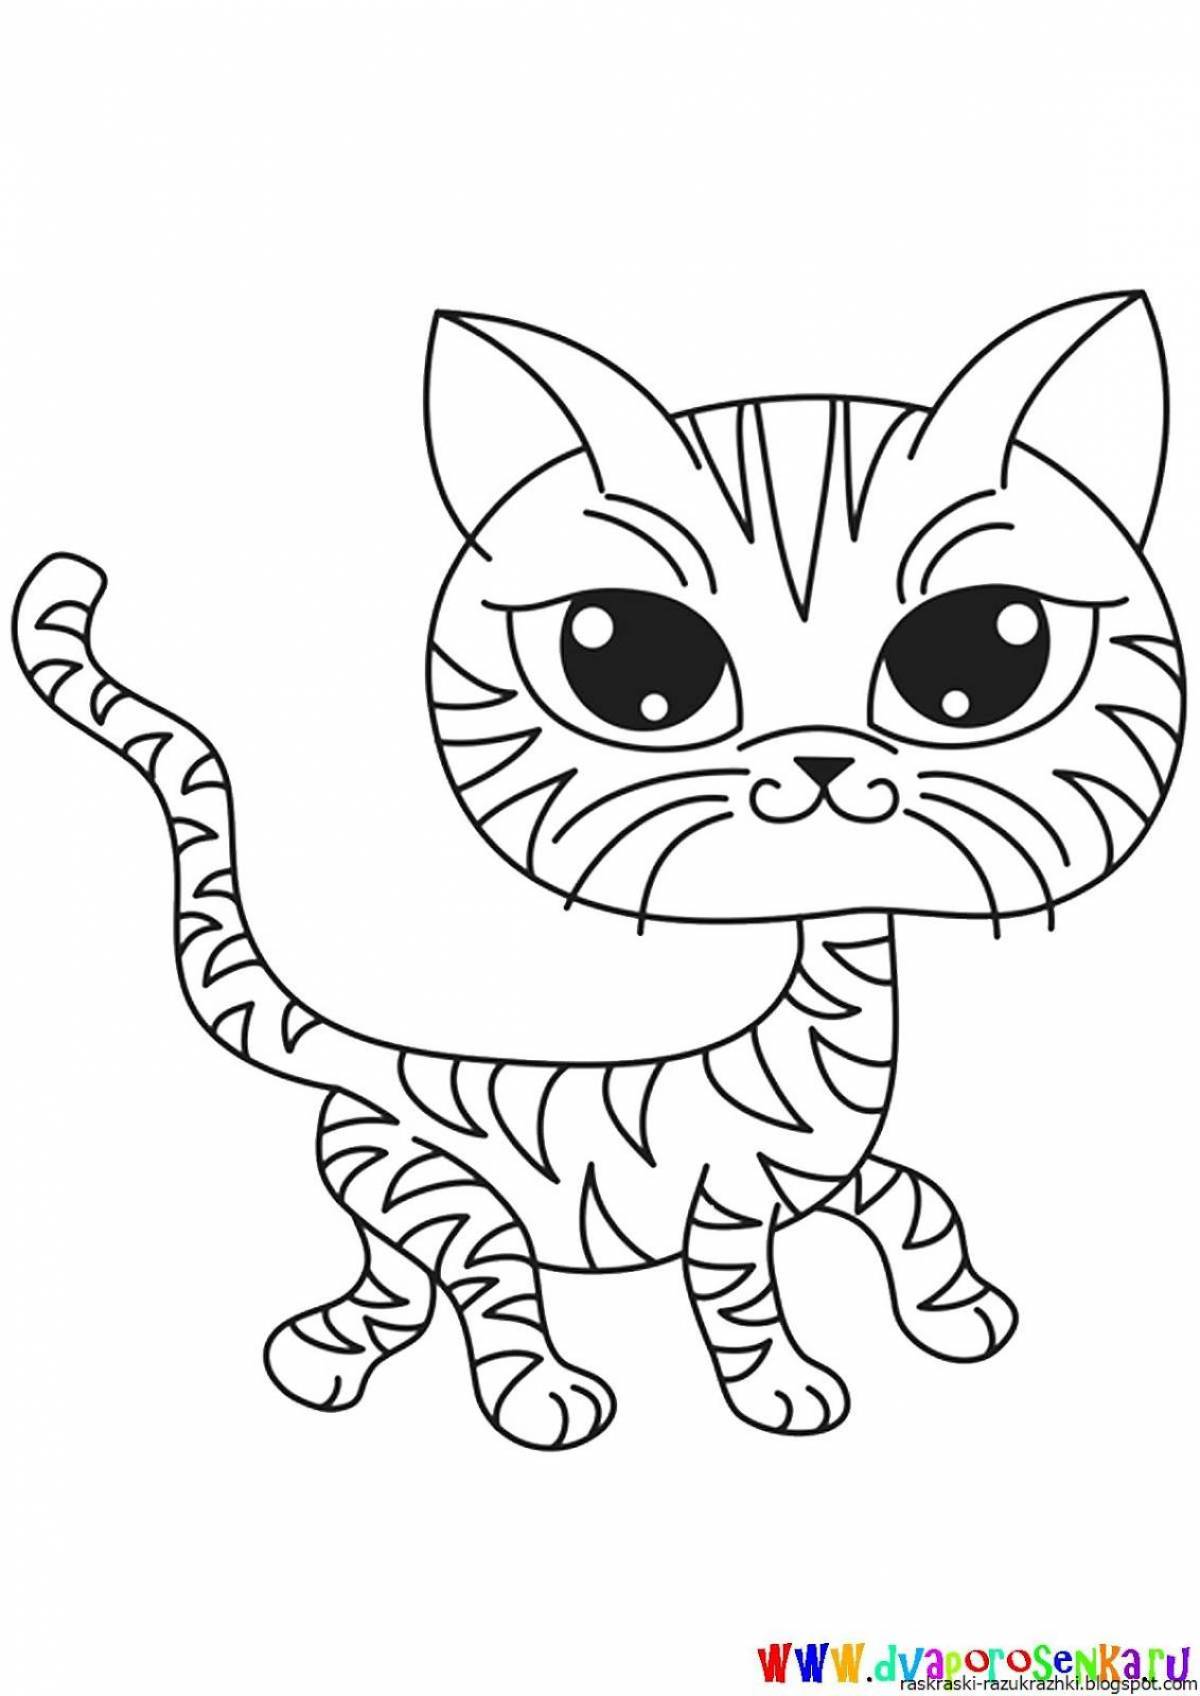 Precious kitten coloring for kids